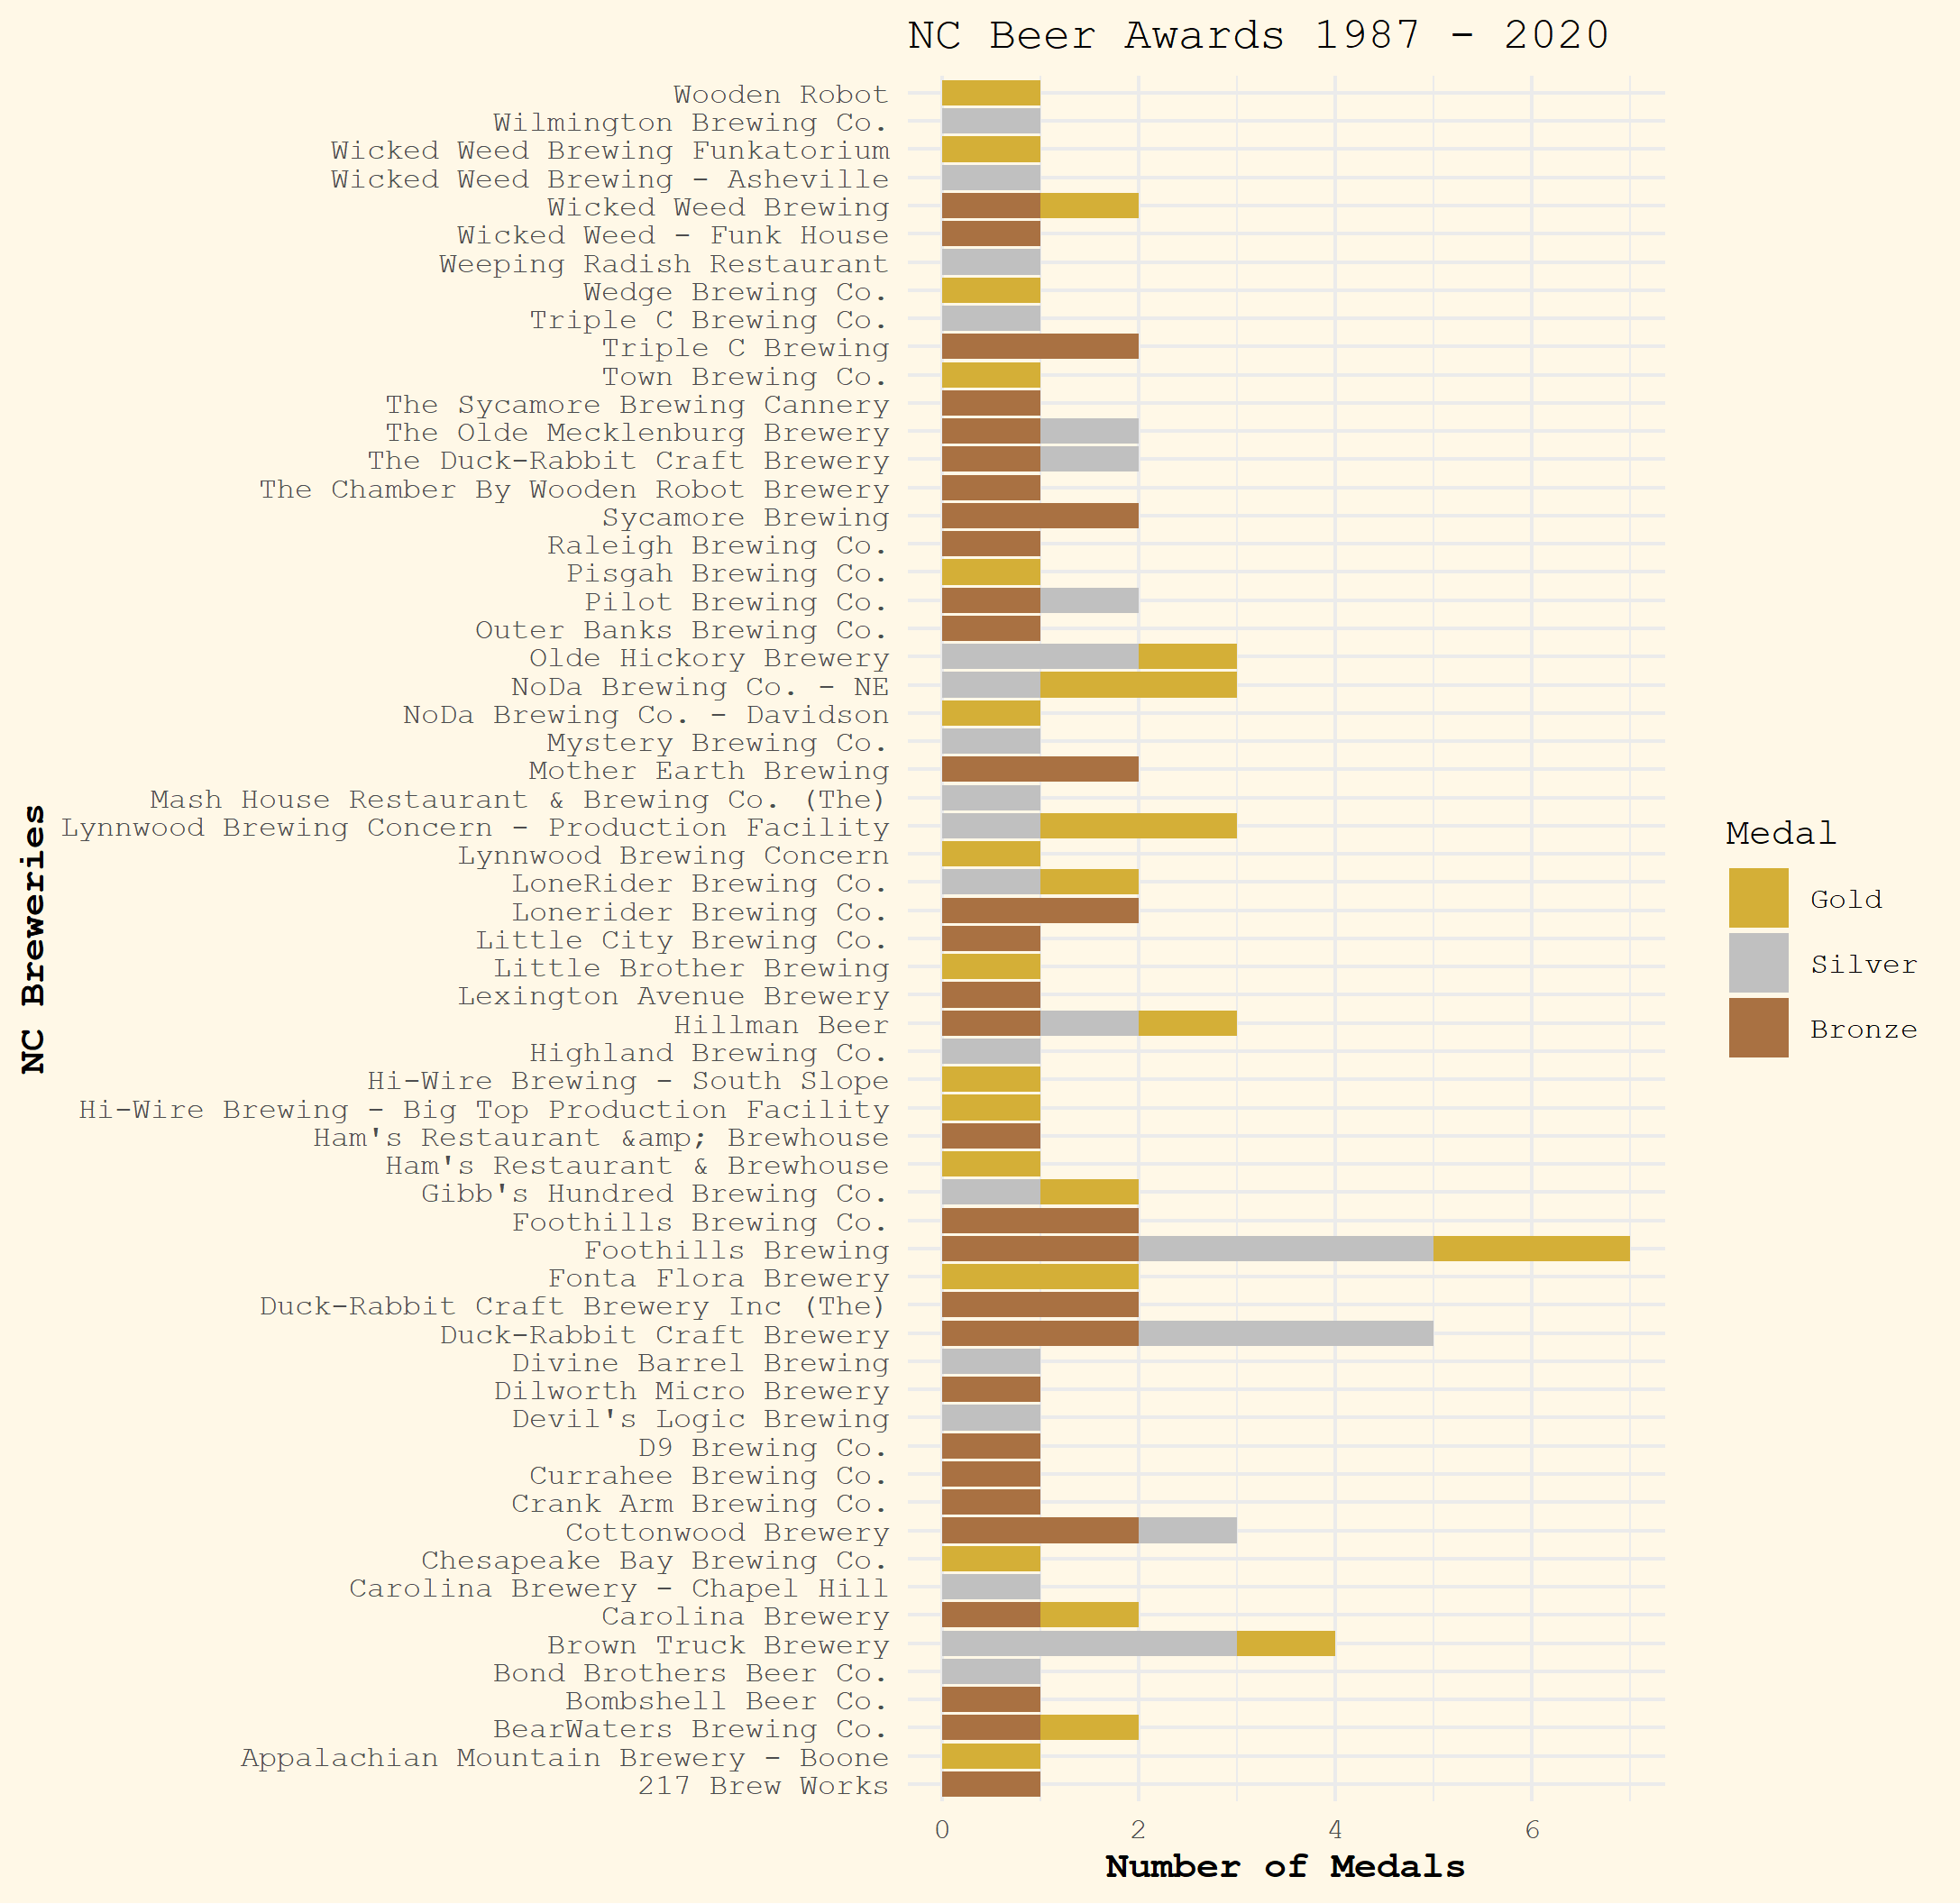 bar plot showing the number of beer awards NC breweries received from 1987 - 2020